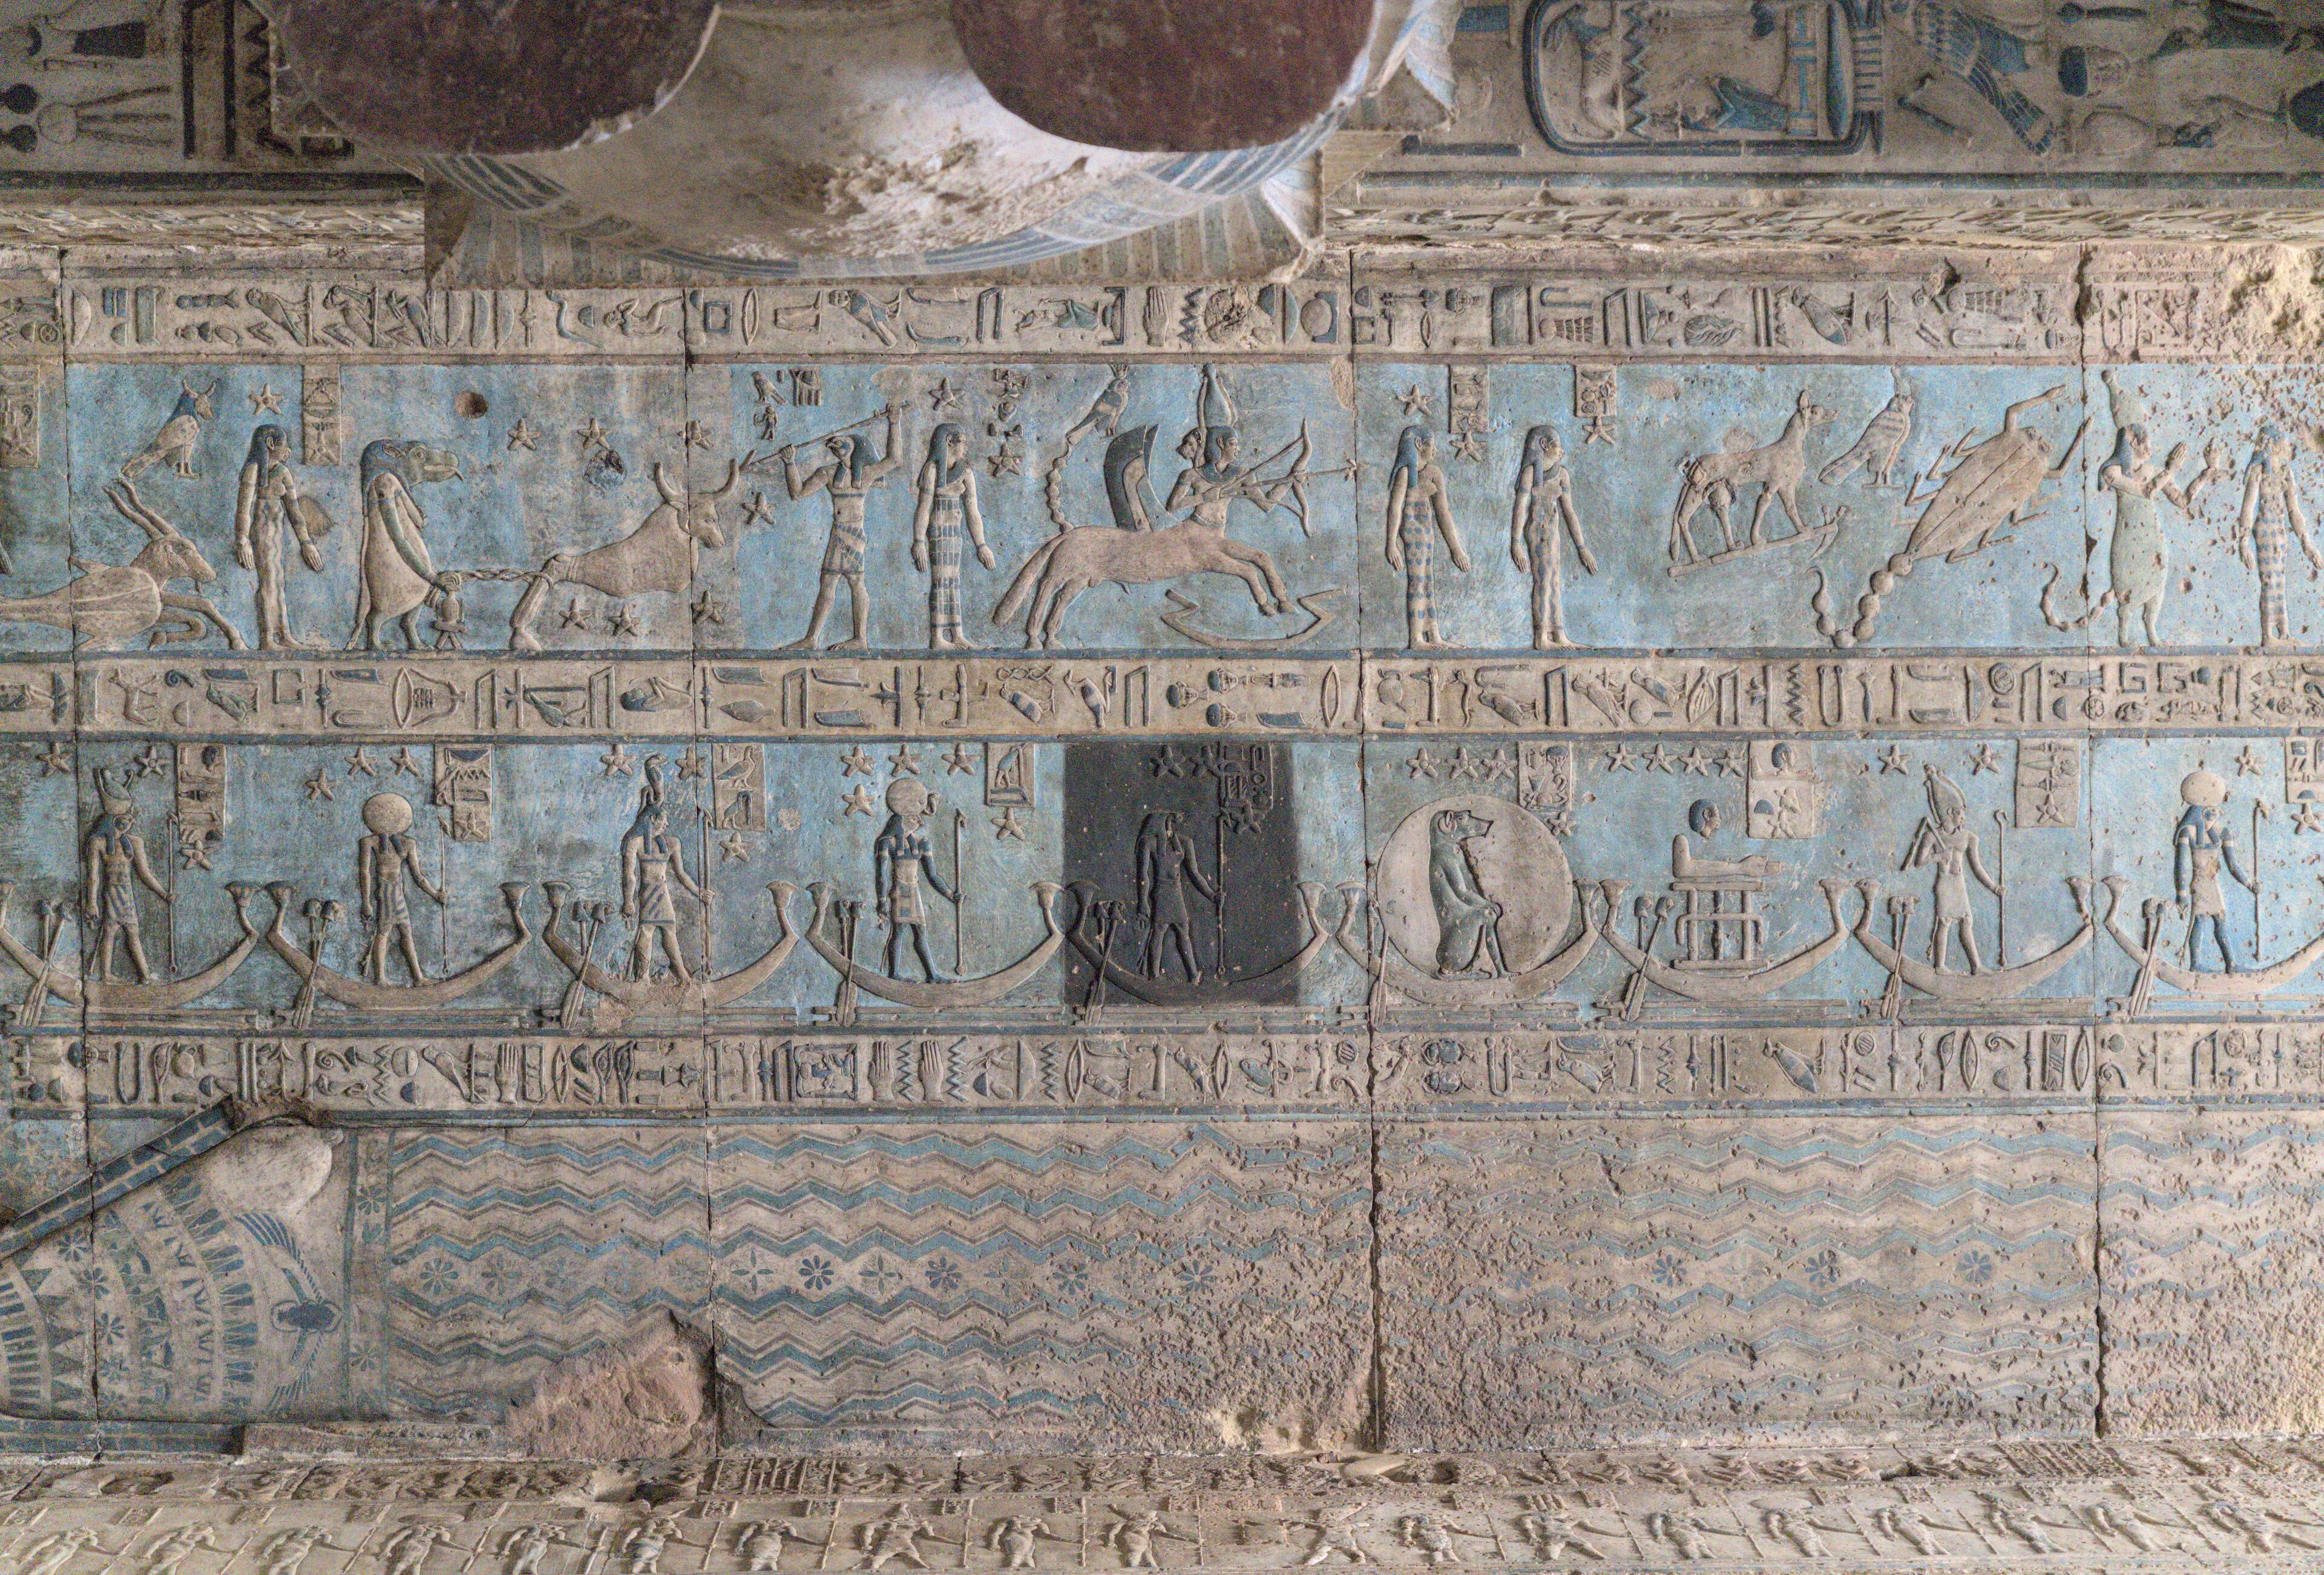 Dendera - Ceiling showing zodiac constellations